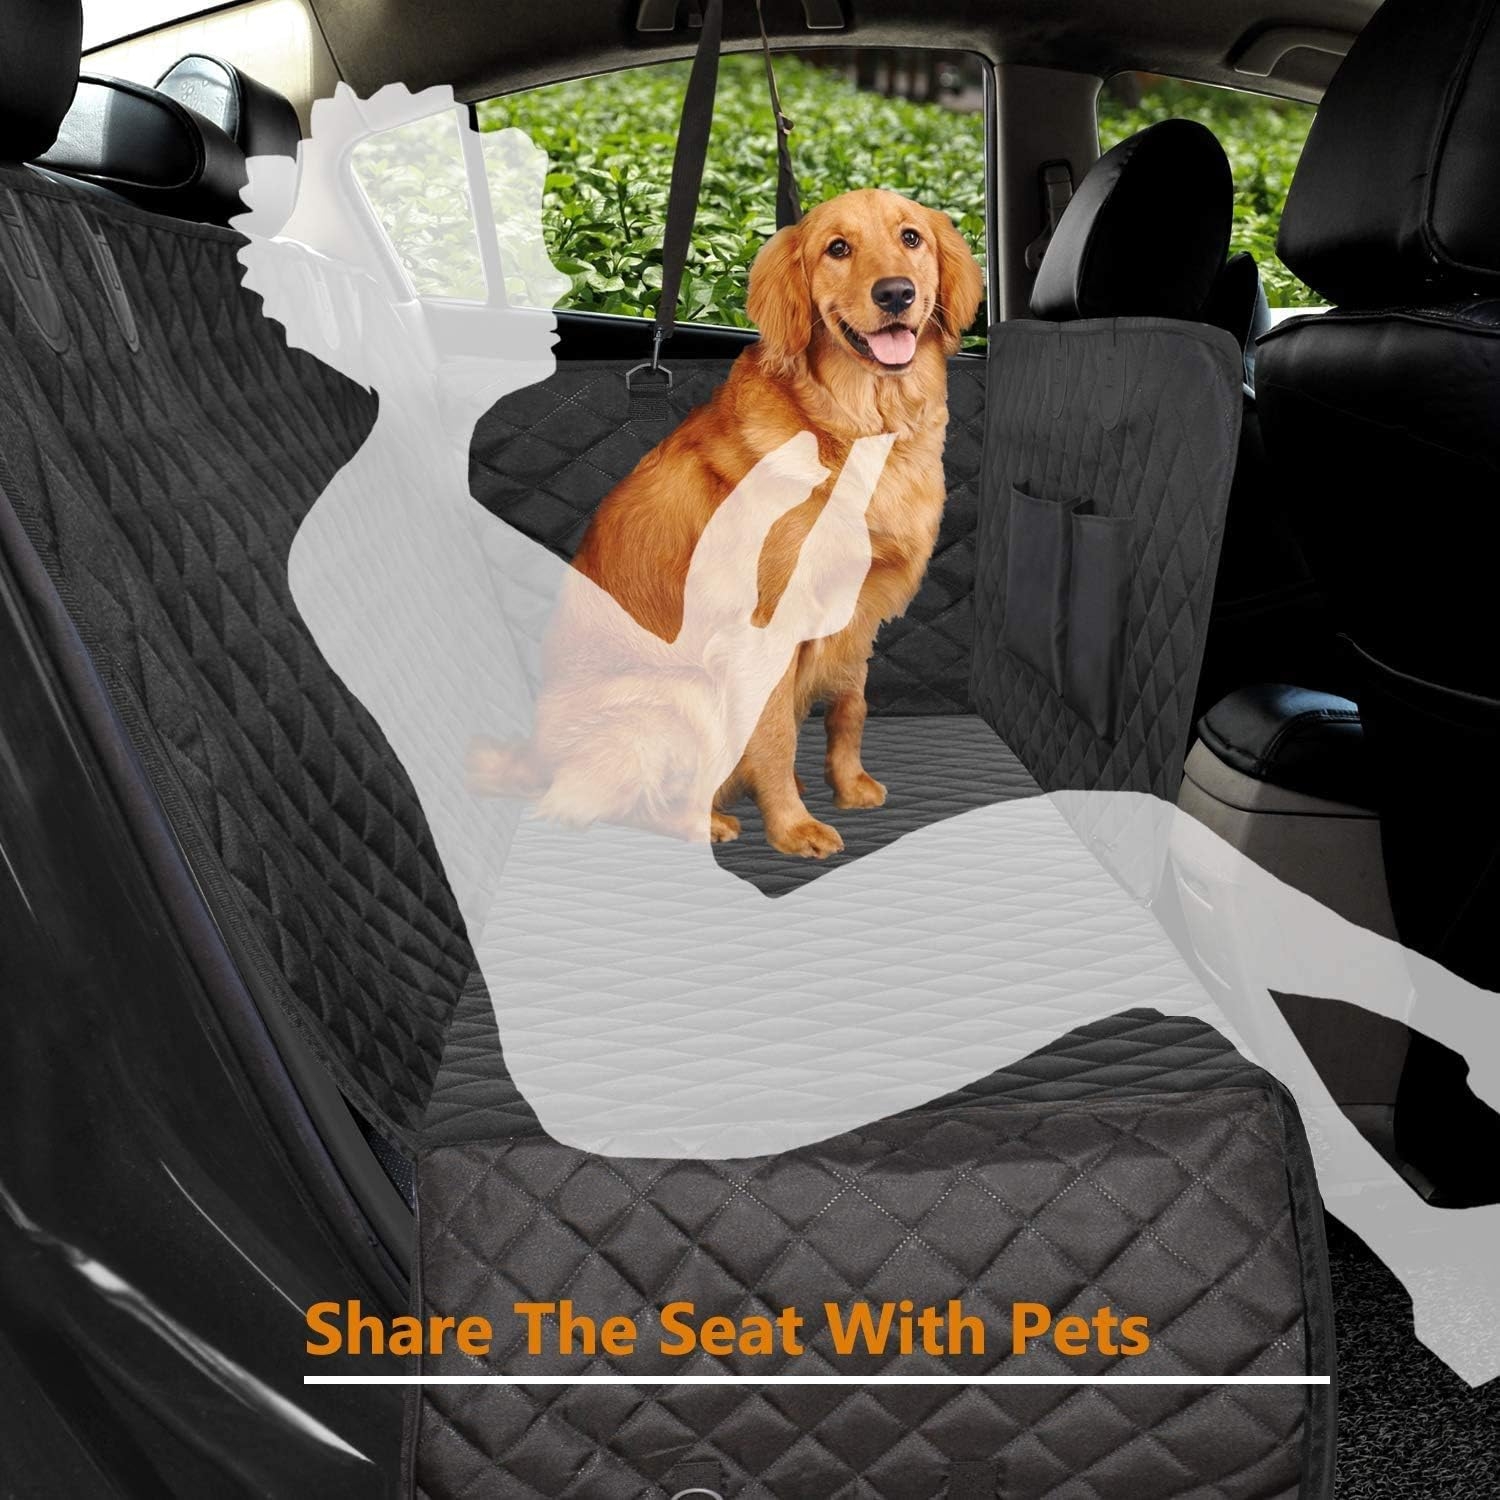 Vailge 100% Waterproof Dog Car Seat Covers, Dog Seat Cover with Side Flaps, Pet Seat Cover for Back Seat - Black, Hammock Convertible